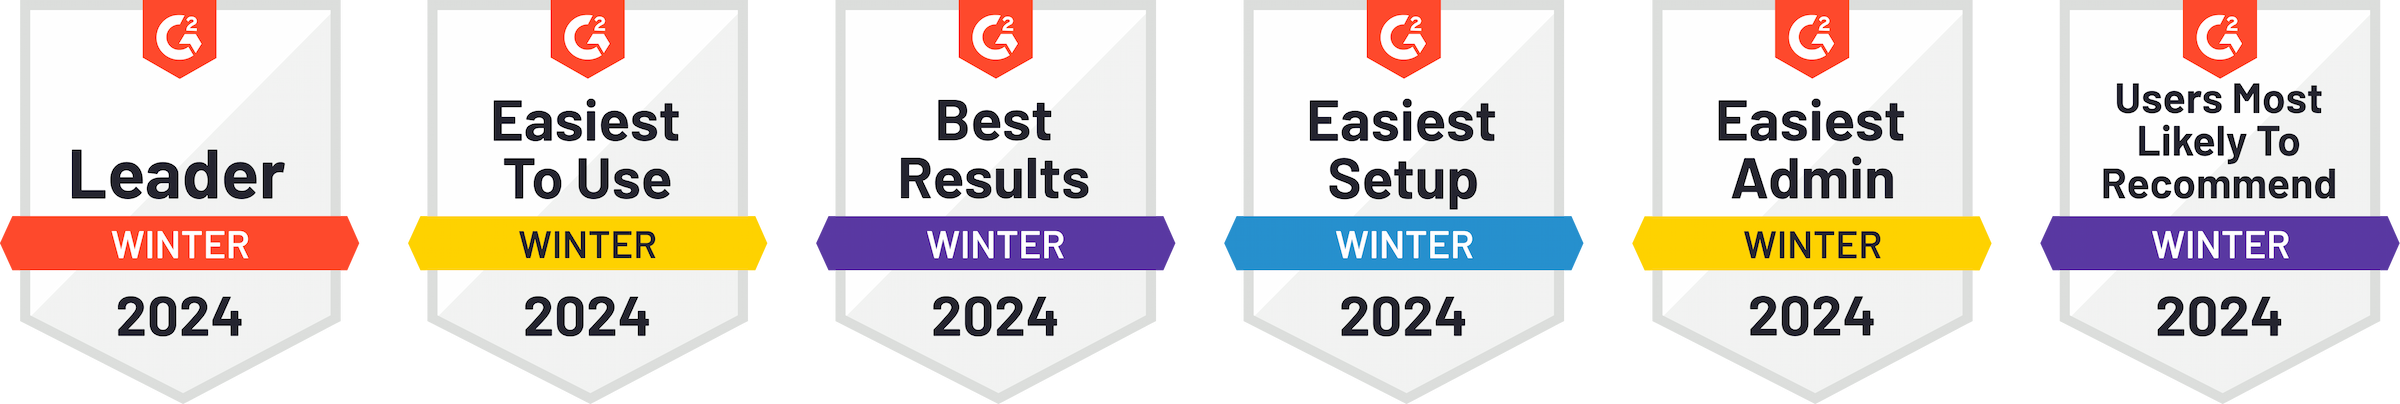 Wealthbox CRM G2 Awards for Winter 2024